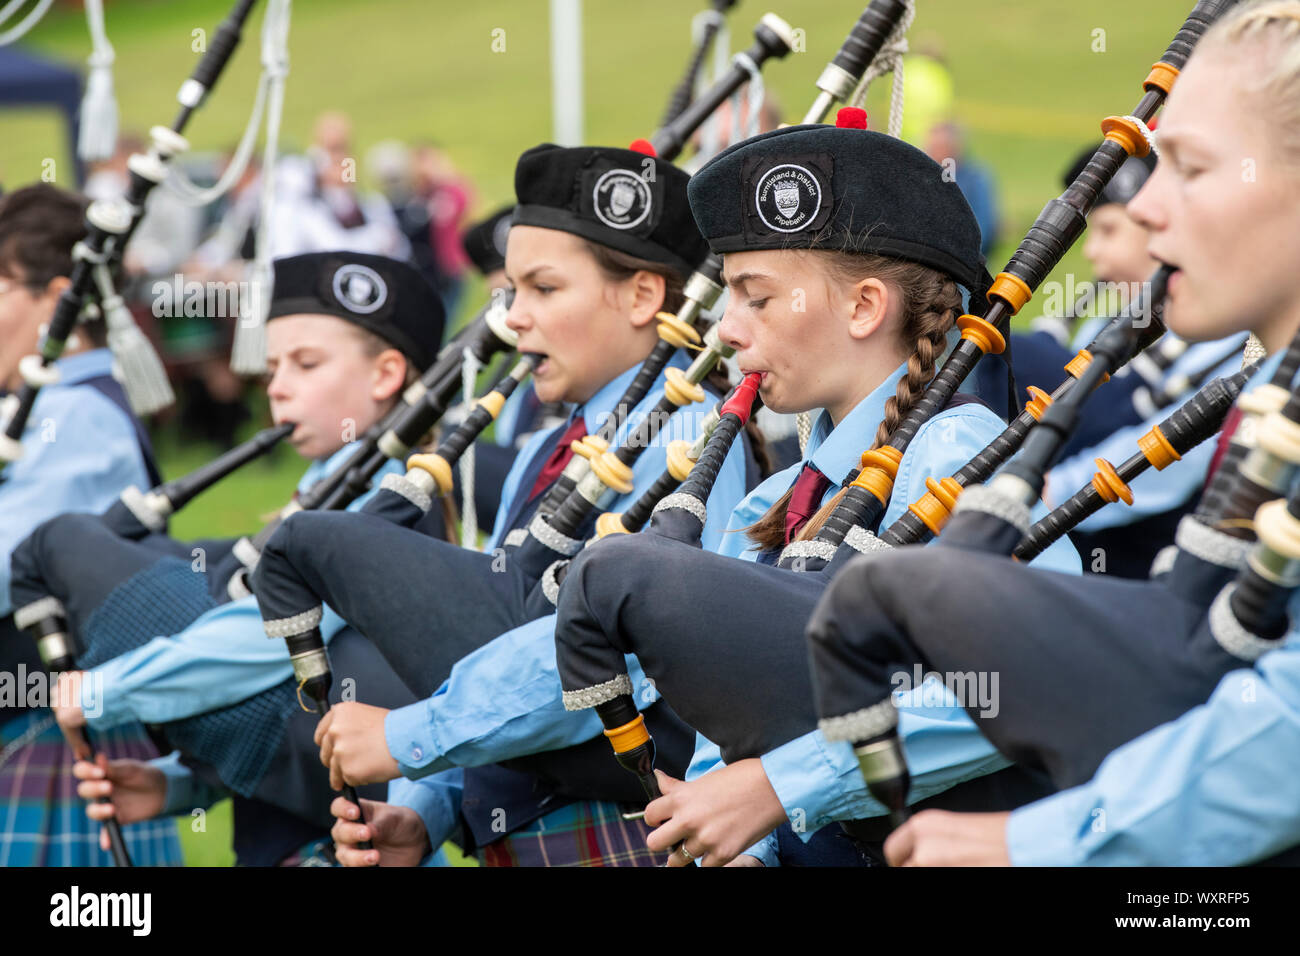 Burntisland and District Pipe Band playing bagpipes at Peebles highland games. Scottish borders, Scotland Stock Photo